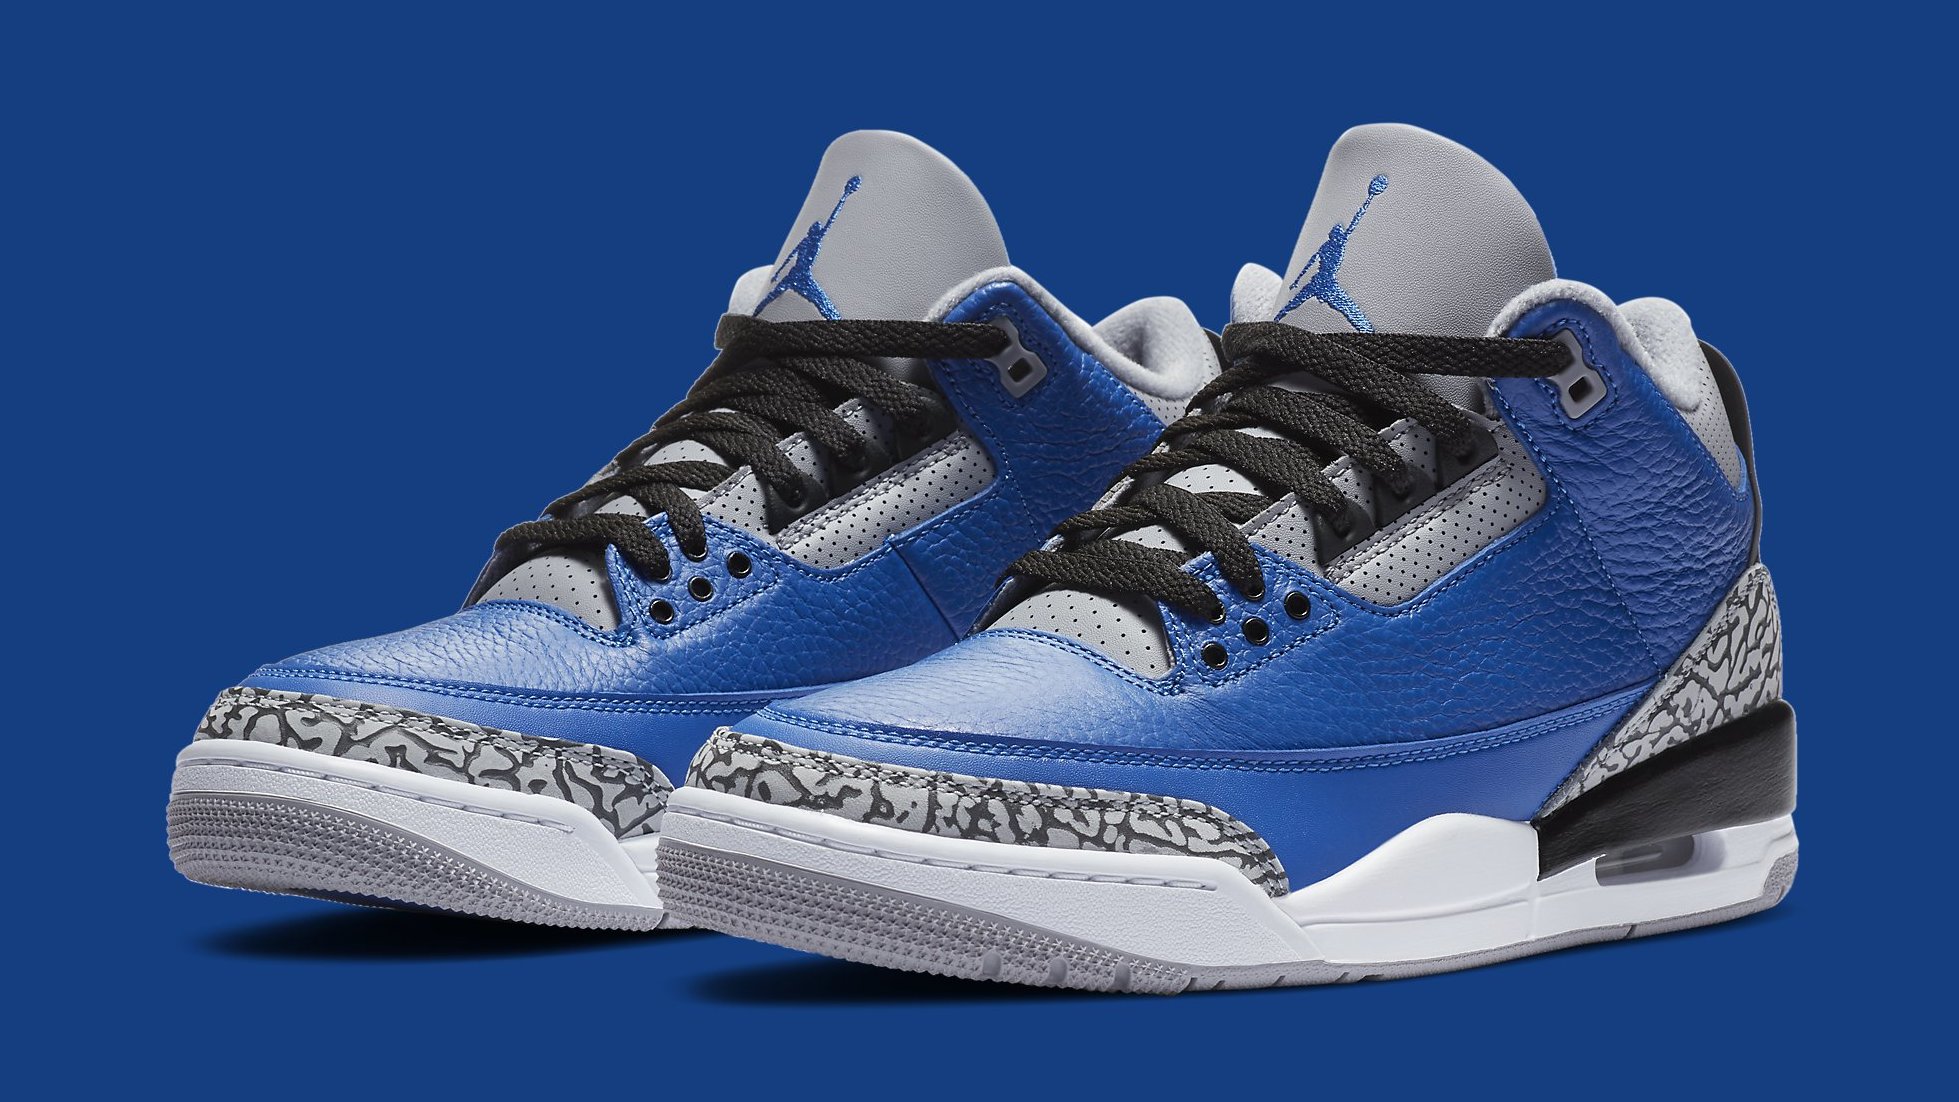 Varsity Royal' Air Jordan 3s to Release In the U.S. Next Month | Complex